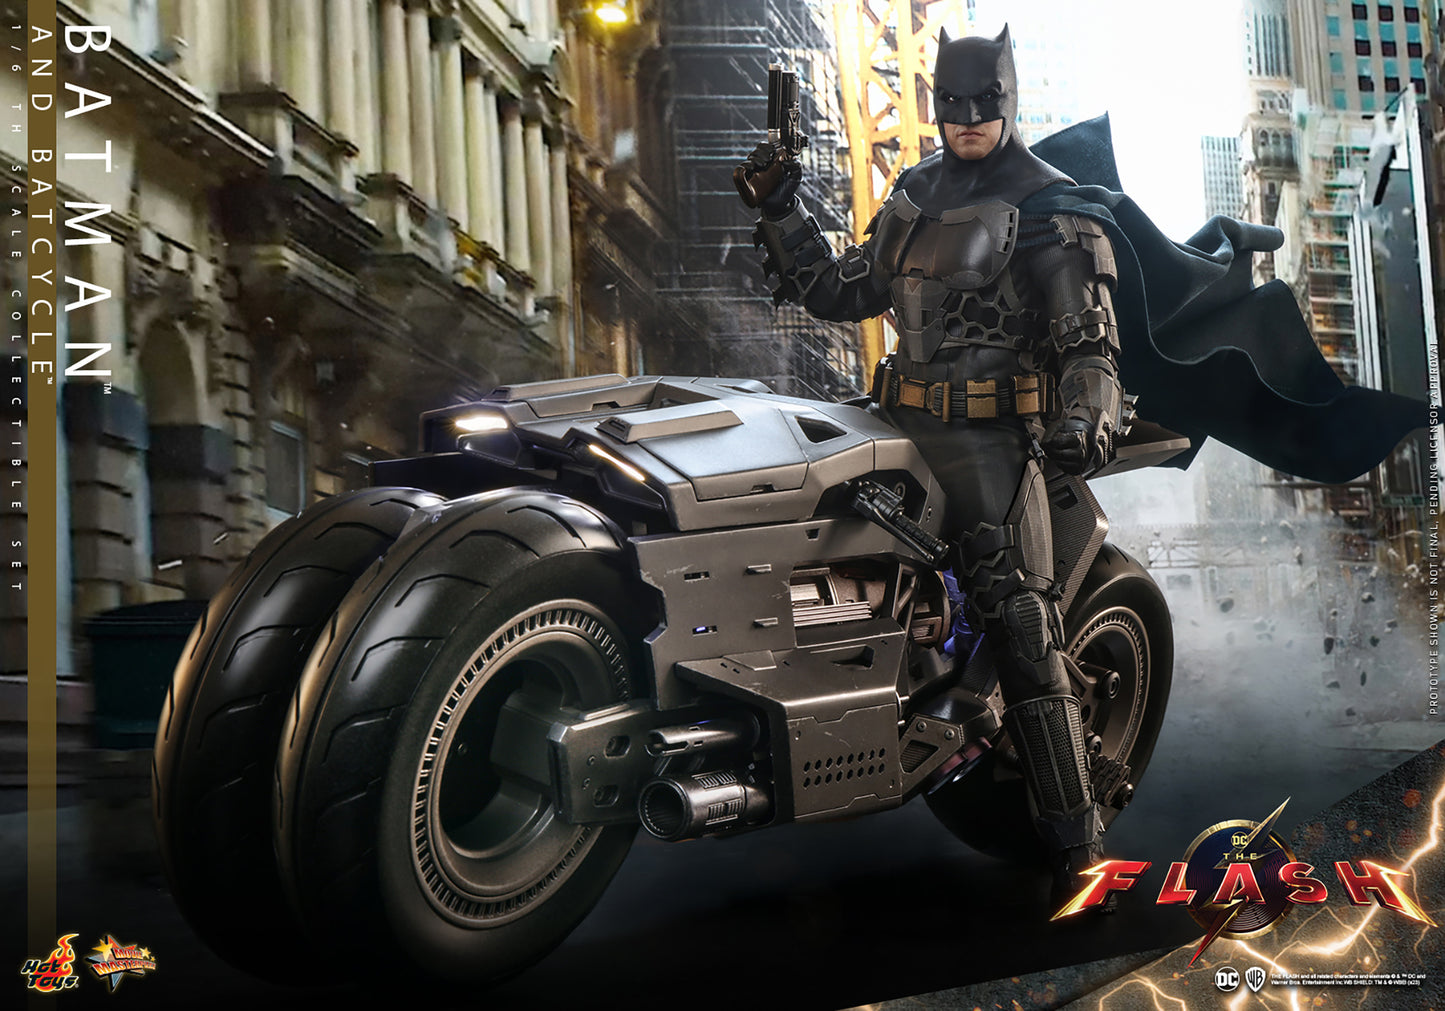 Batman and Batcycle Sixth Scale Figure Set by Hot Toys